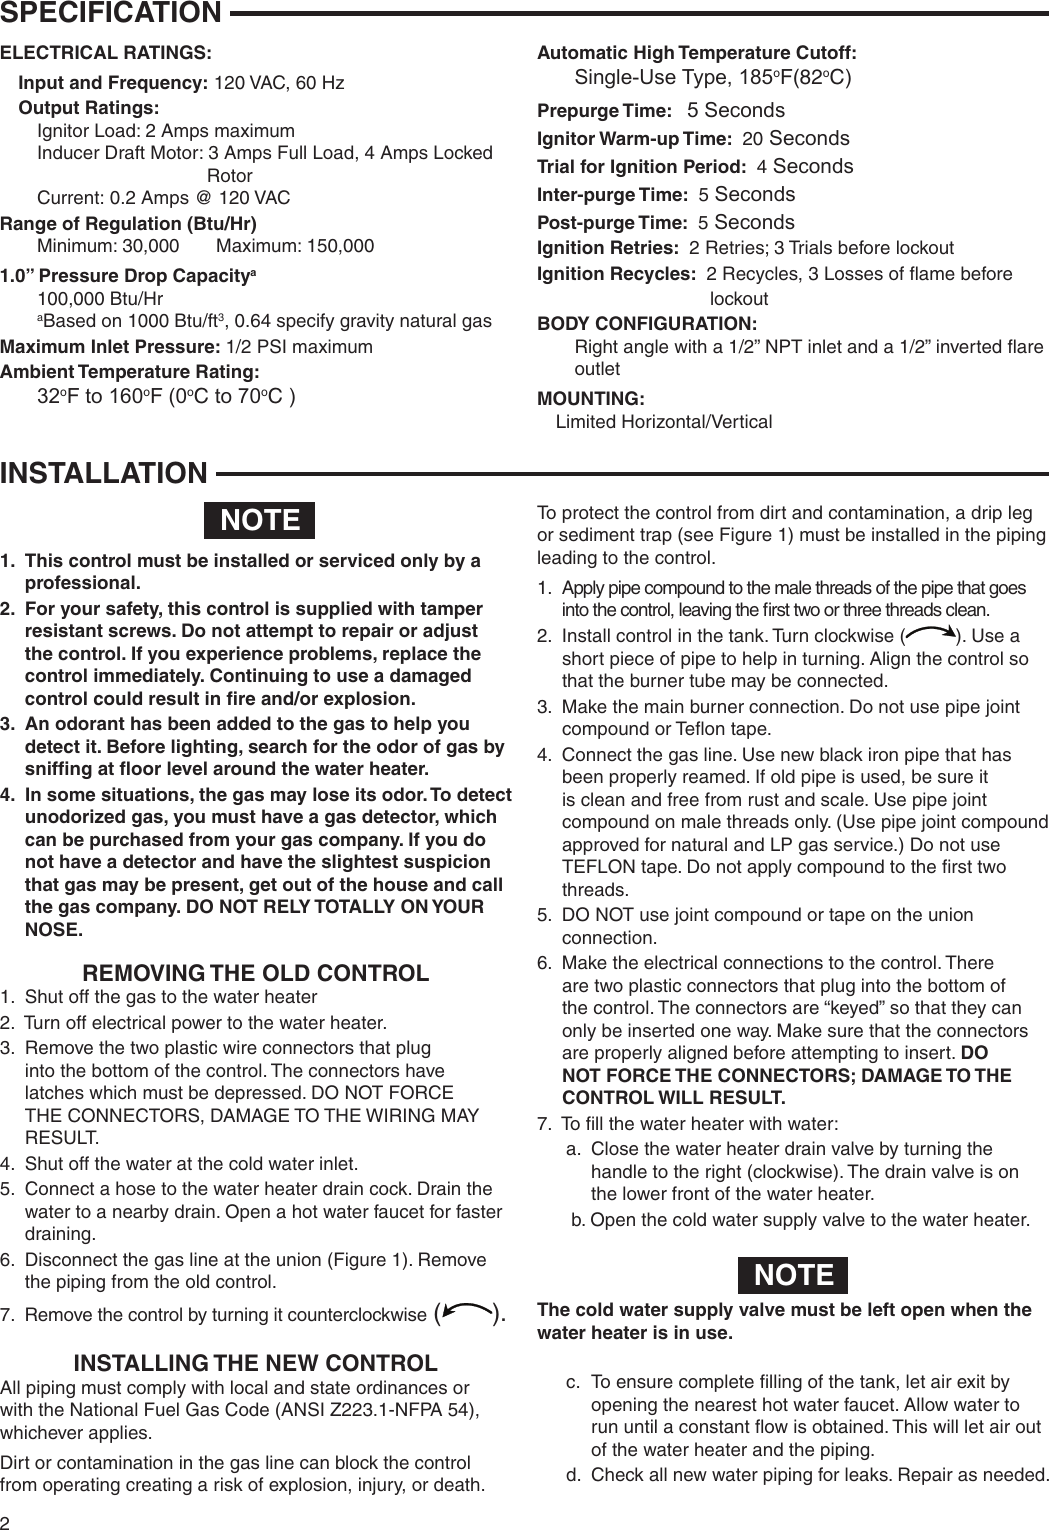 Page 2 of 8 - White-Rodgers White-Rodgers-37E73A-903-Intelli-Vent-Control-For-Power-Vented-Water-Heaters-Installation-Instructions- 37E73A-903_Intellivent_37-7109A  White-rodgers-37e73a-903-intelli-vent-control-for-power-vented-water-heaters-installation-instructions